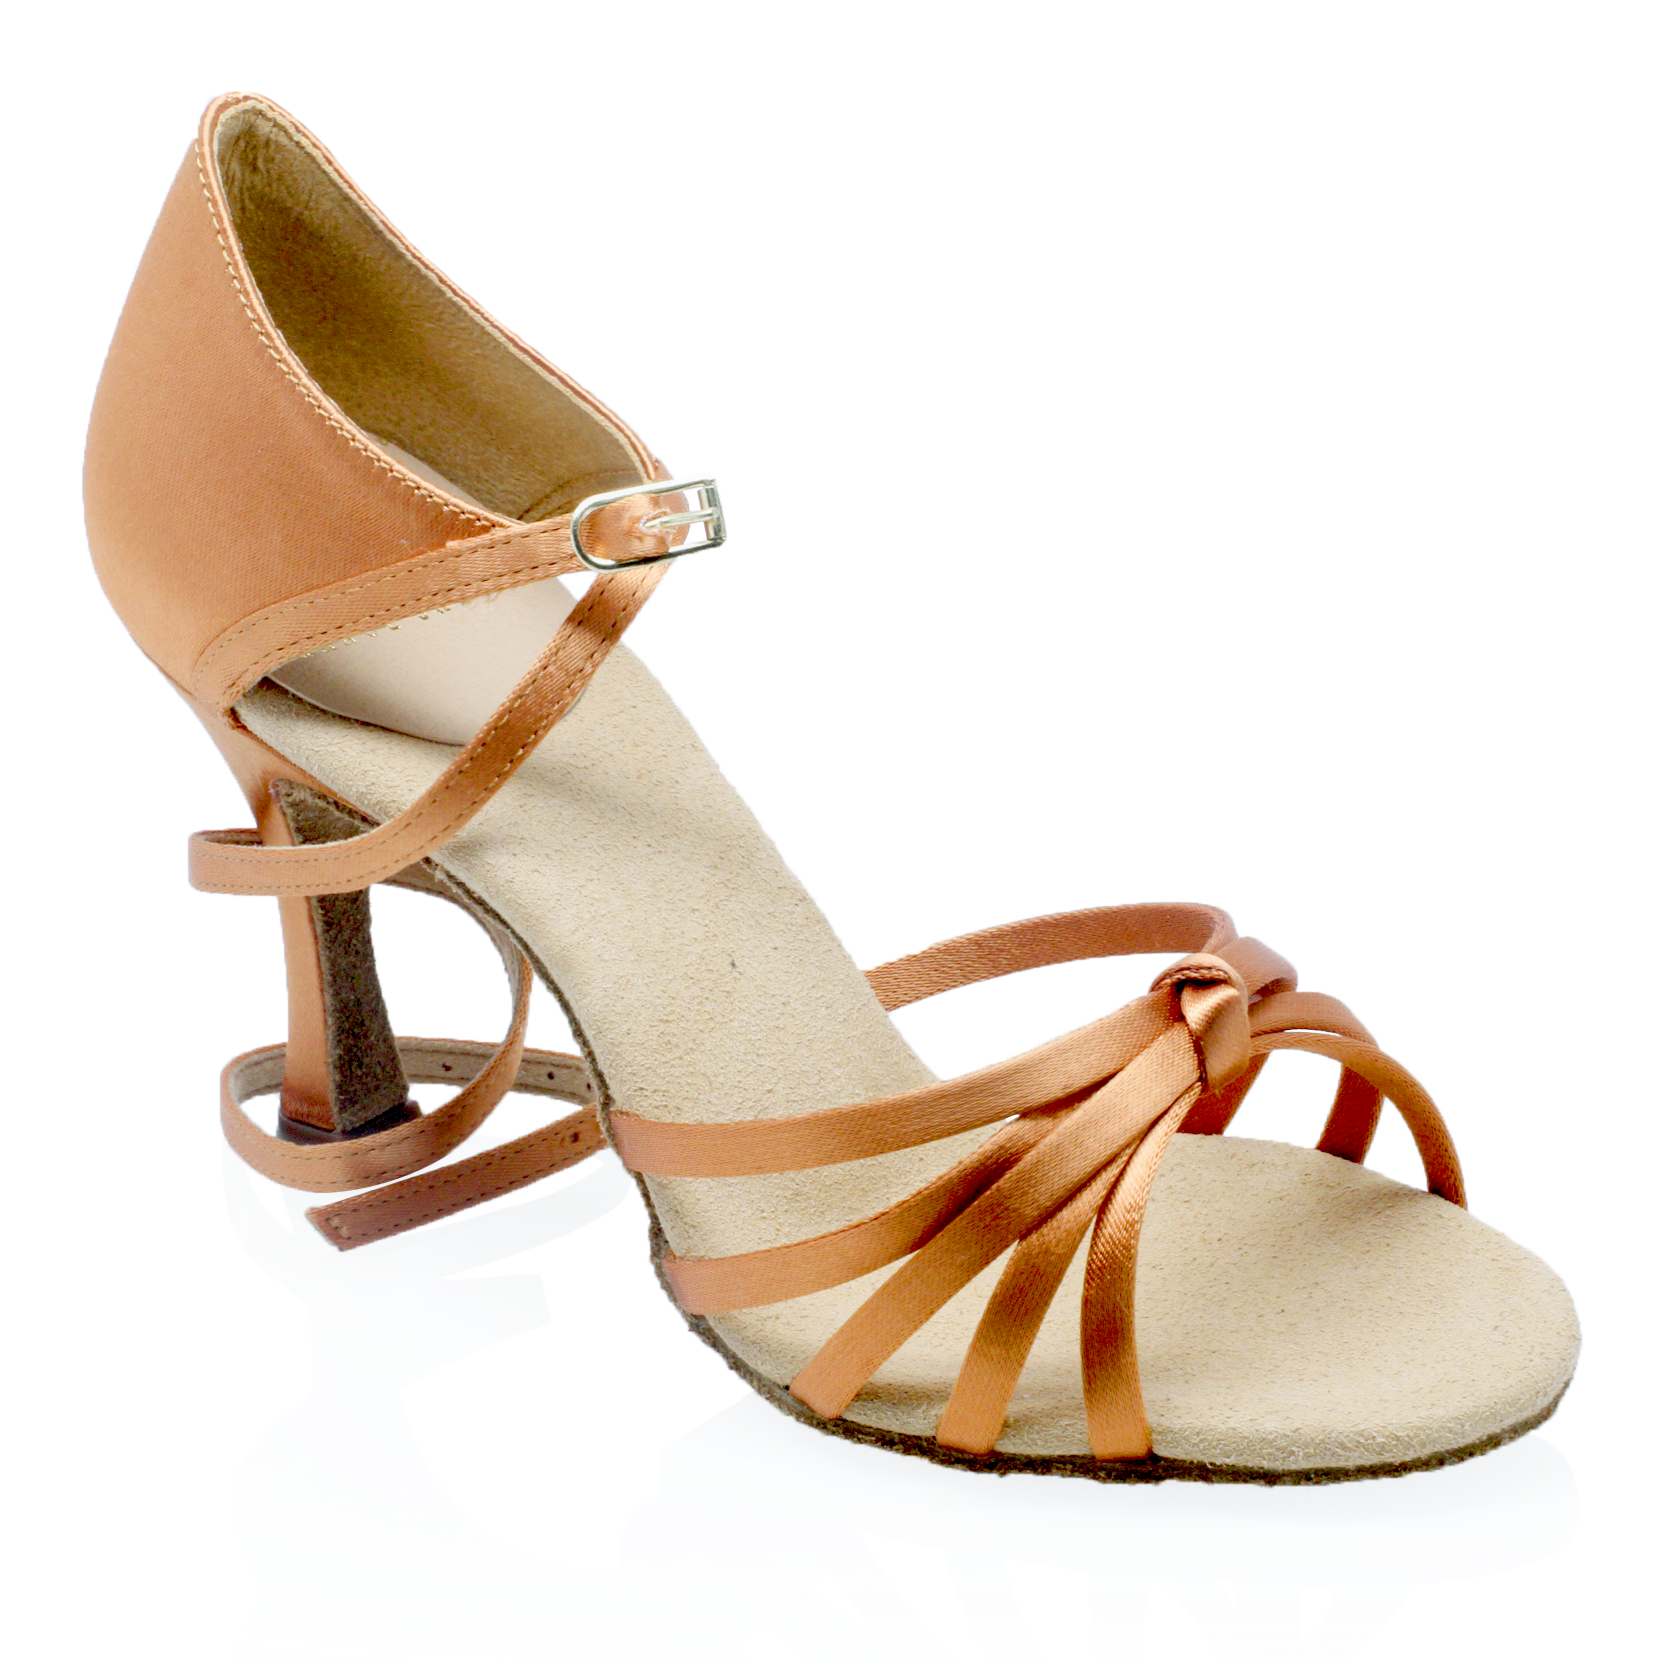 Women's Salsa Street Latin Dance Shoes by Ray Rose 825 Drizzle Light Tan Satin